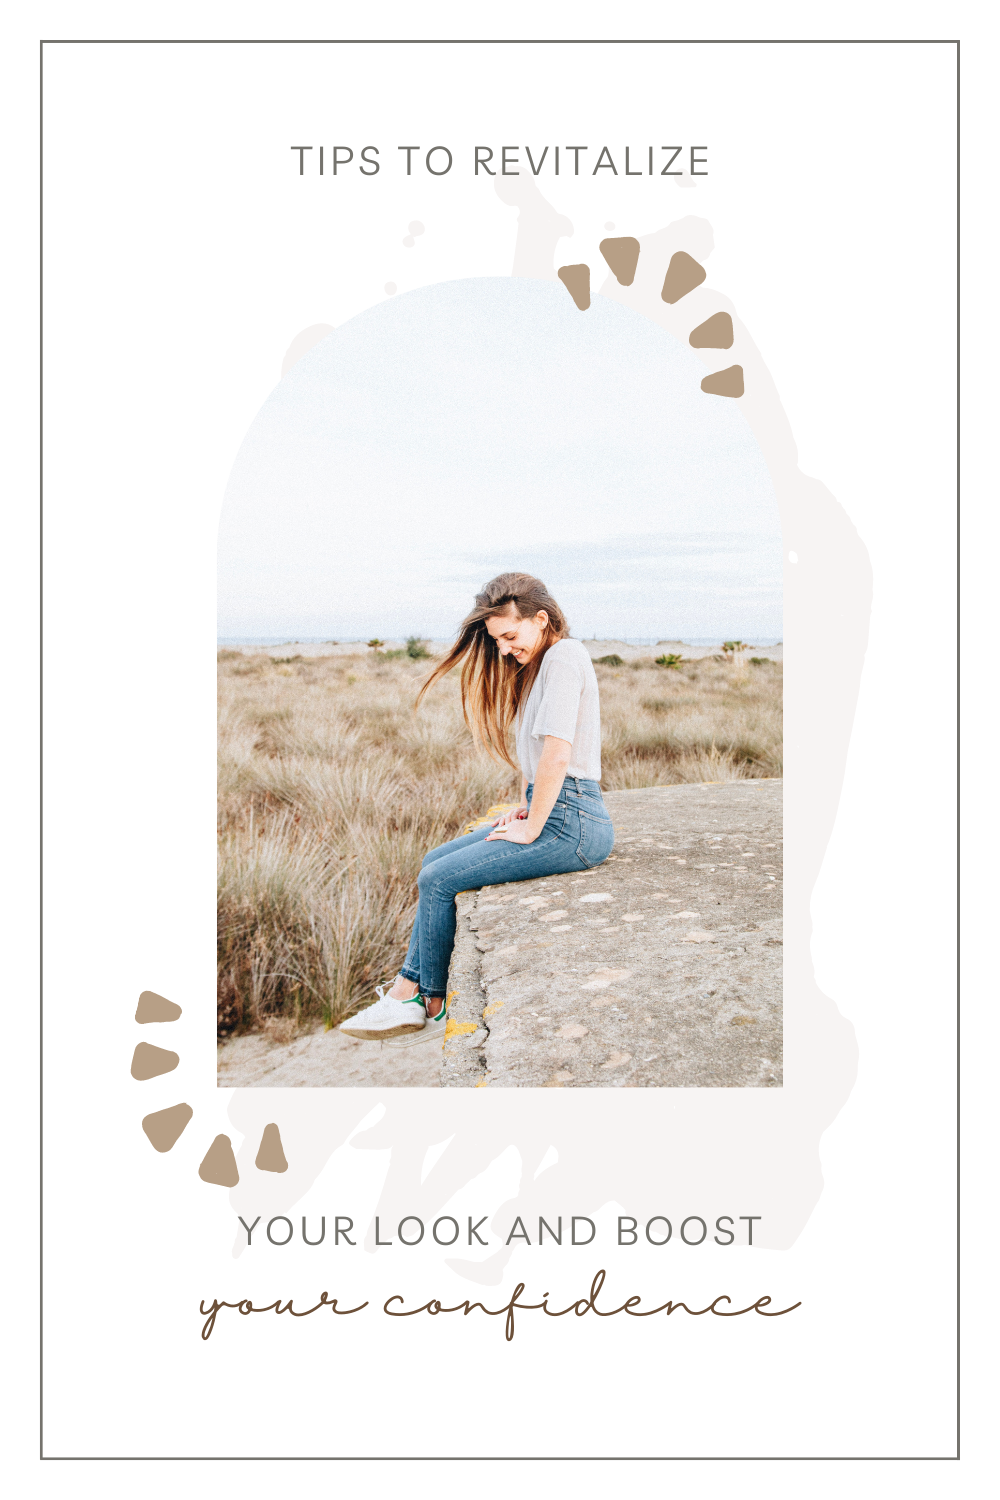 A girls sits on a rock ledge, behind her is wilderneess. She smiles and looks down. She appears to be very confident. This article covers how to revitalize your look and boost your confidence.